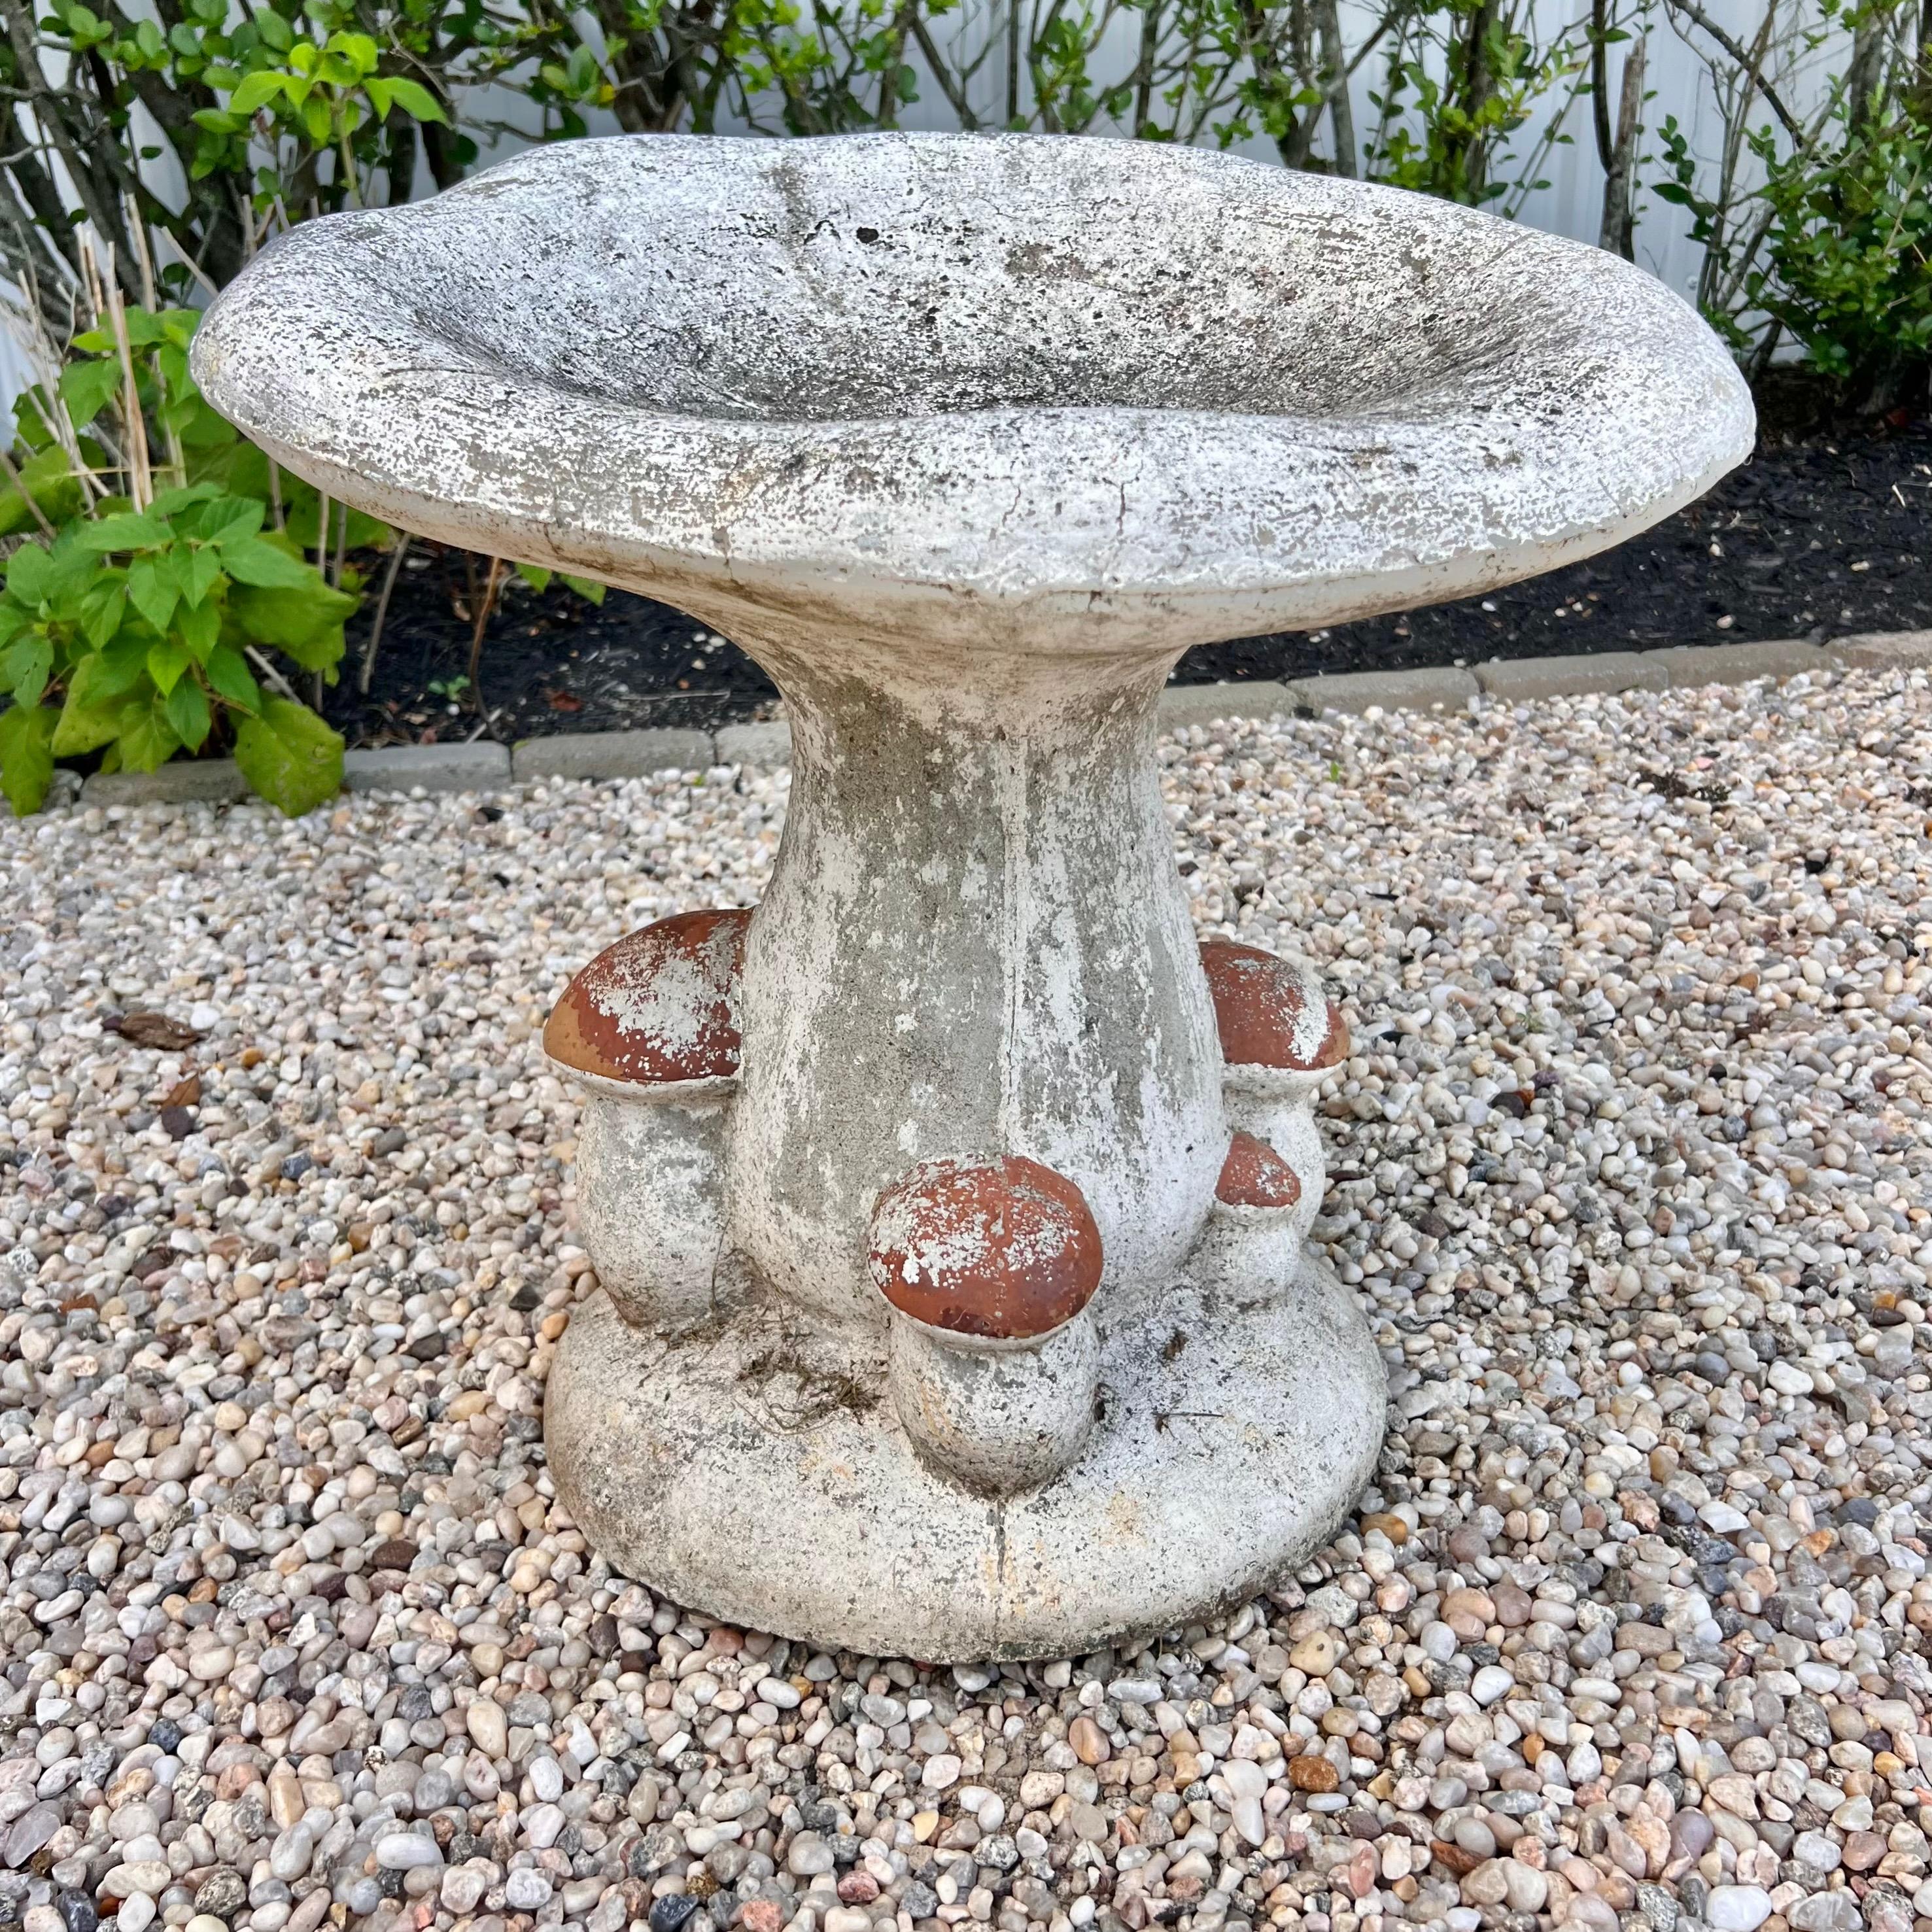 Stunning French concrete mushroom stools from the 1950s. All hand made and hand painted featuring small decorative mushrooms along the base. This statement piece would look fabulous in a garden or on a patio. Gorgeous patina. Extremely heavy and